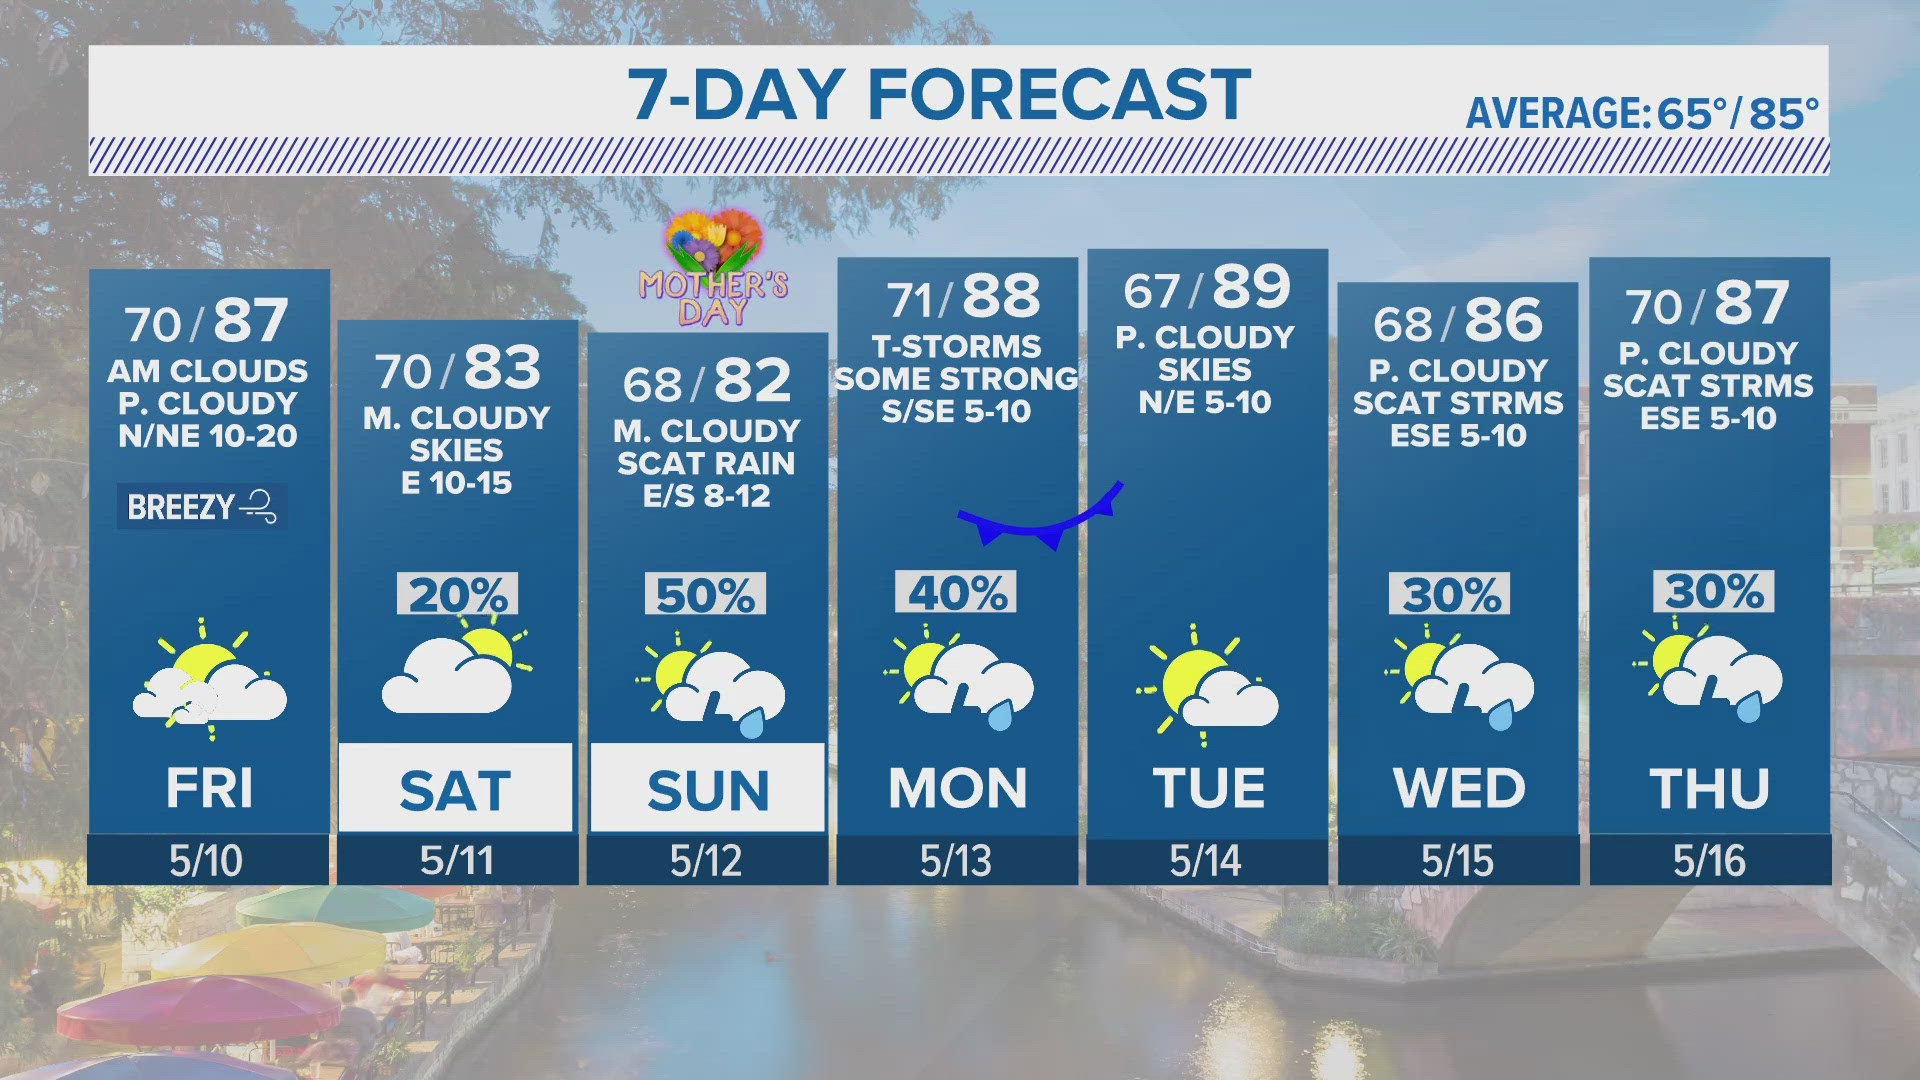 Rain chances in the forecast for Mother's Day weekend.